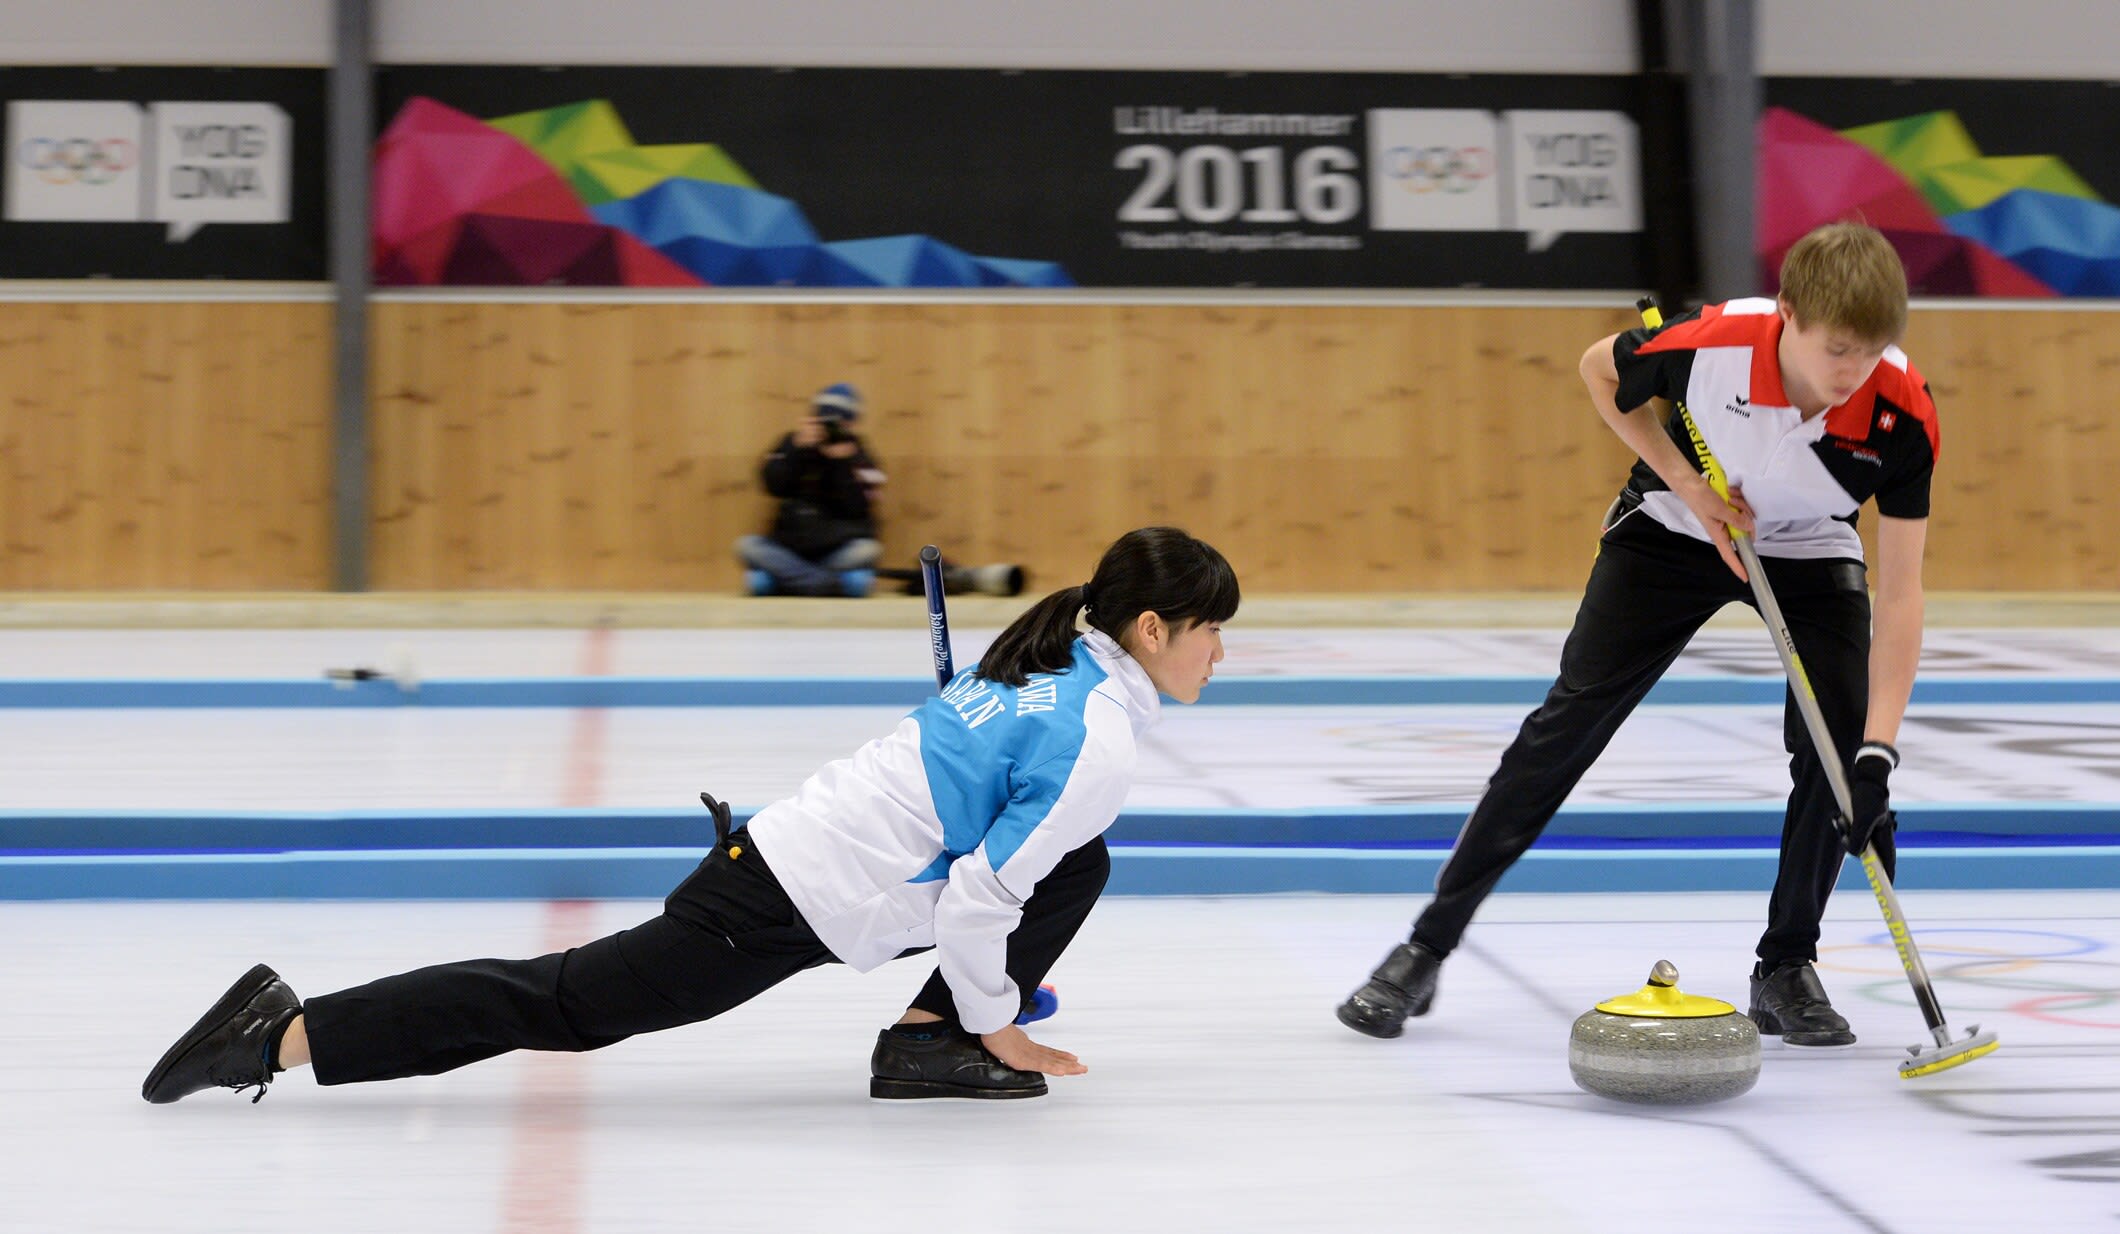 Lillehammer’s youngest curling star Phillip Hoesli finishes on a high